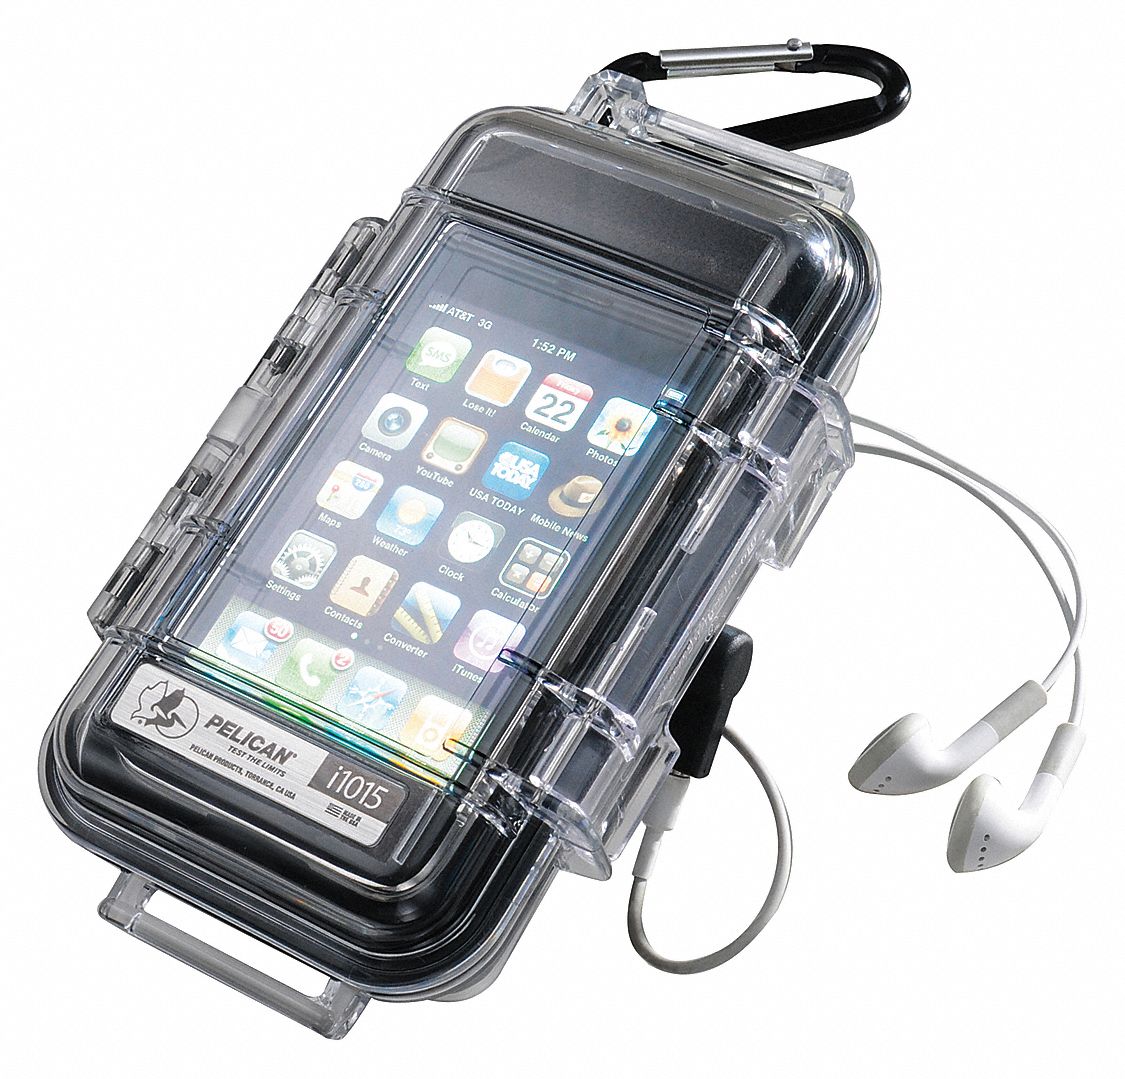 23M169 - Cell Phone/Digital Player Case Blk